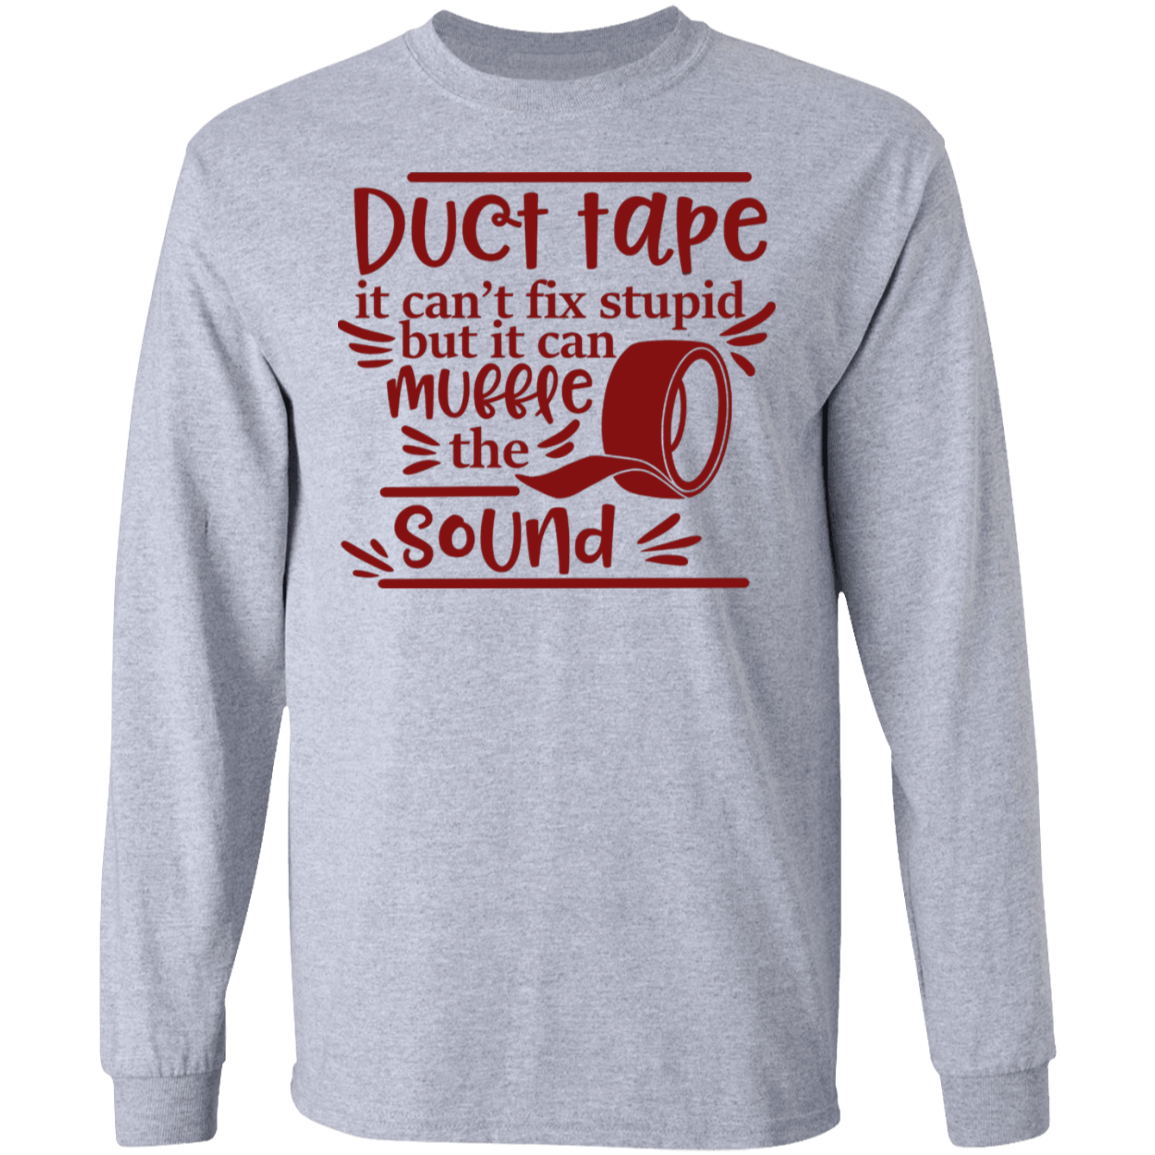 Duct tape long sleeve t'shirt